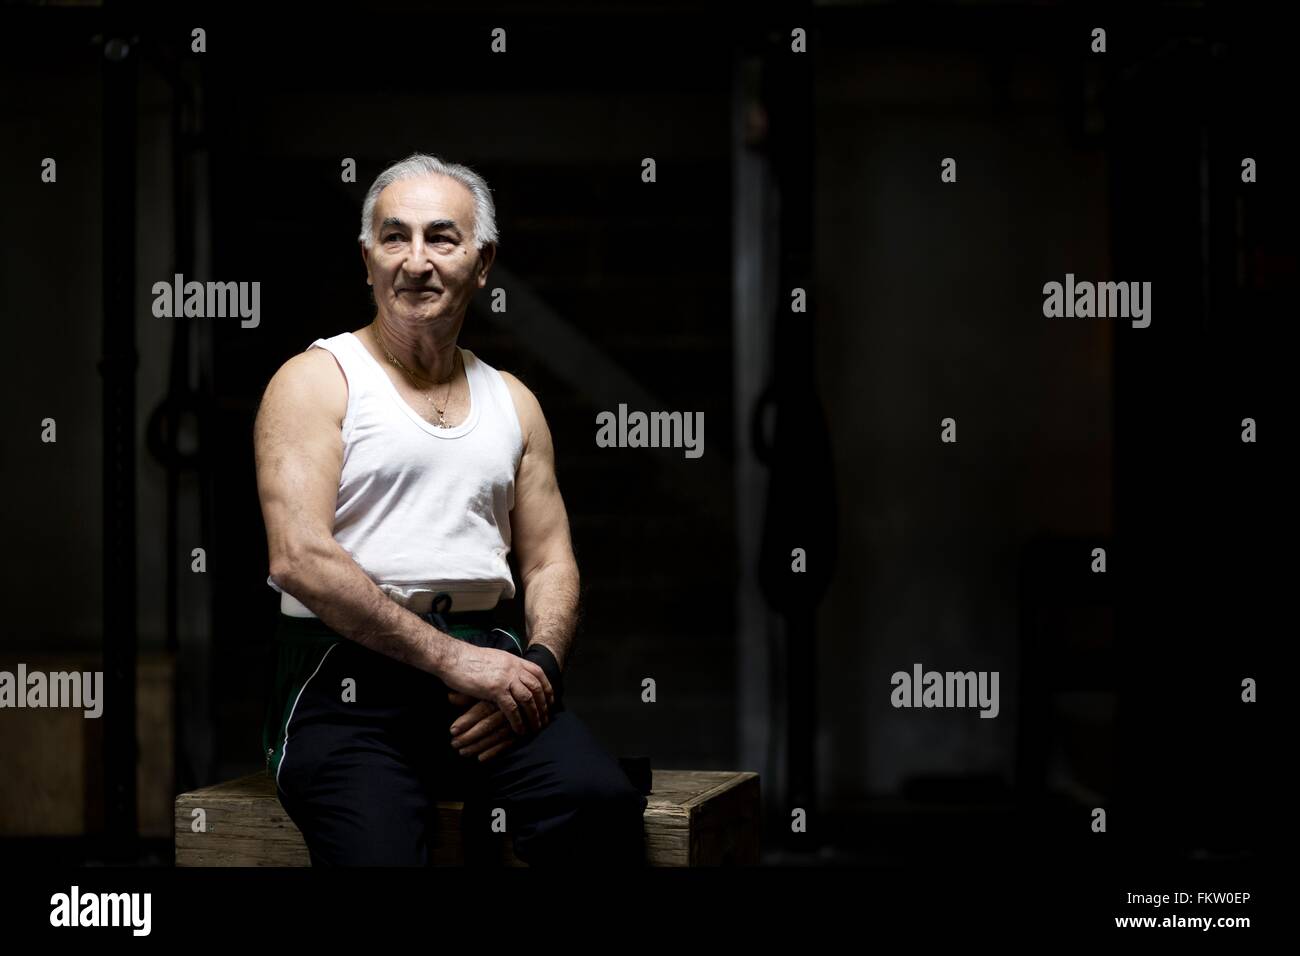 Portrait de grey haired man sitting in the gym Banque D'Images